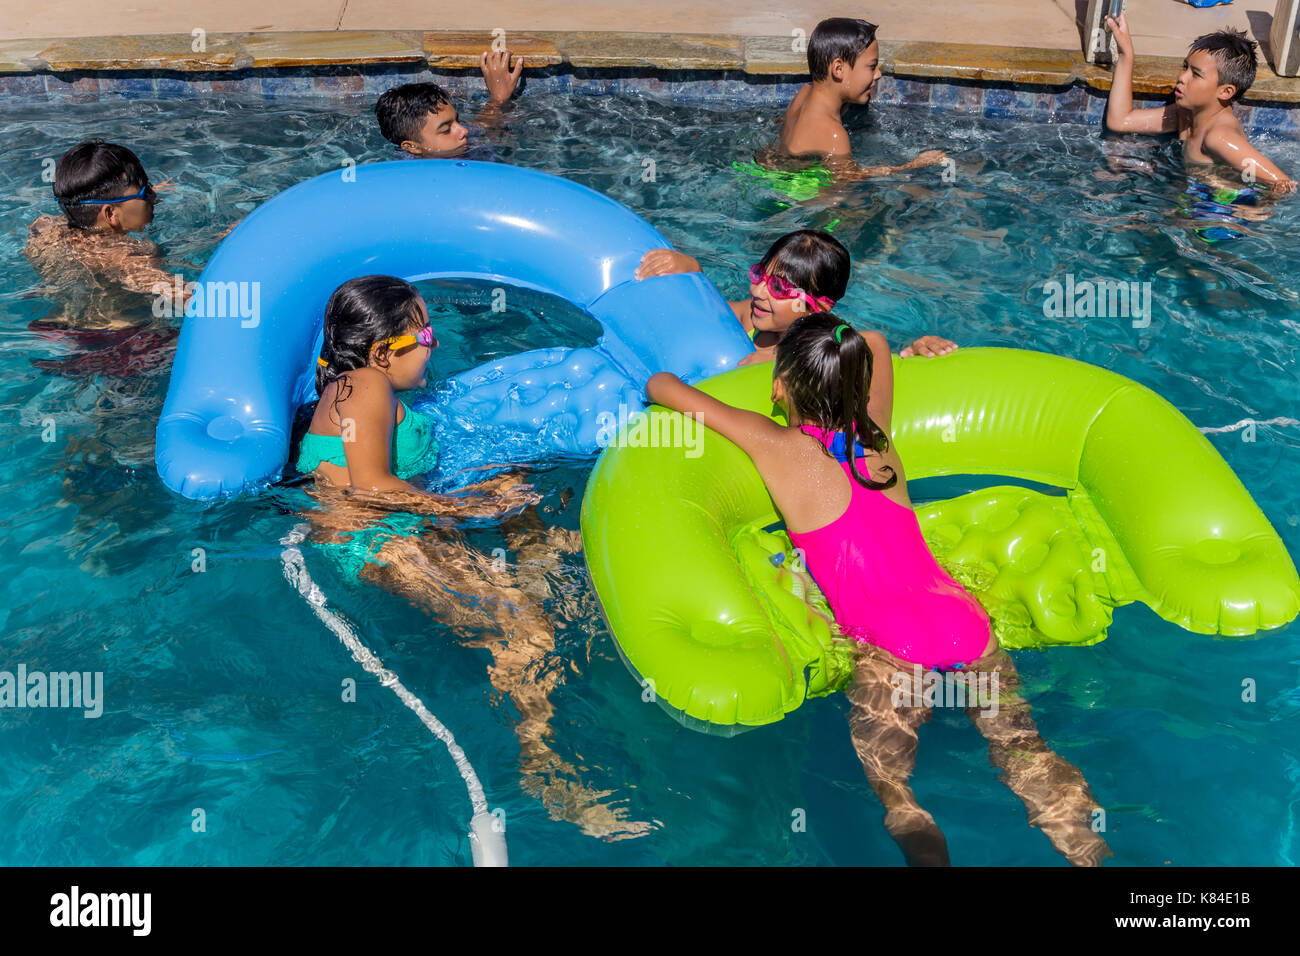 girls and boys, children, swimmers, swimming, swimming pool, freshwater swimming pool, pool party, Castro Valley, Alameda County, California, United Stock Photo